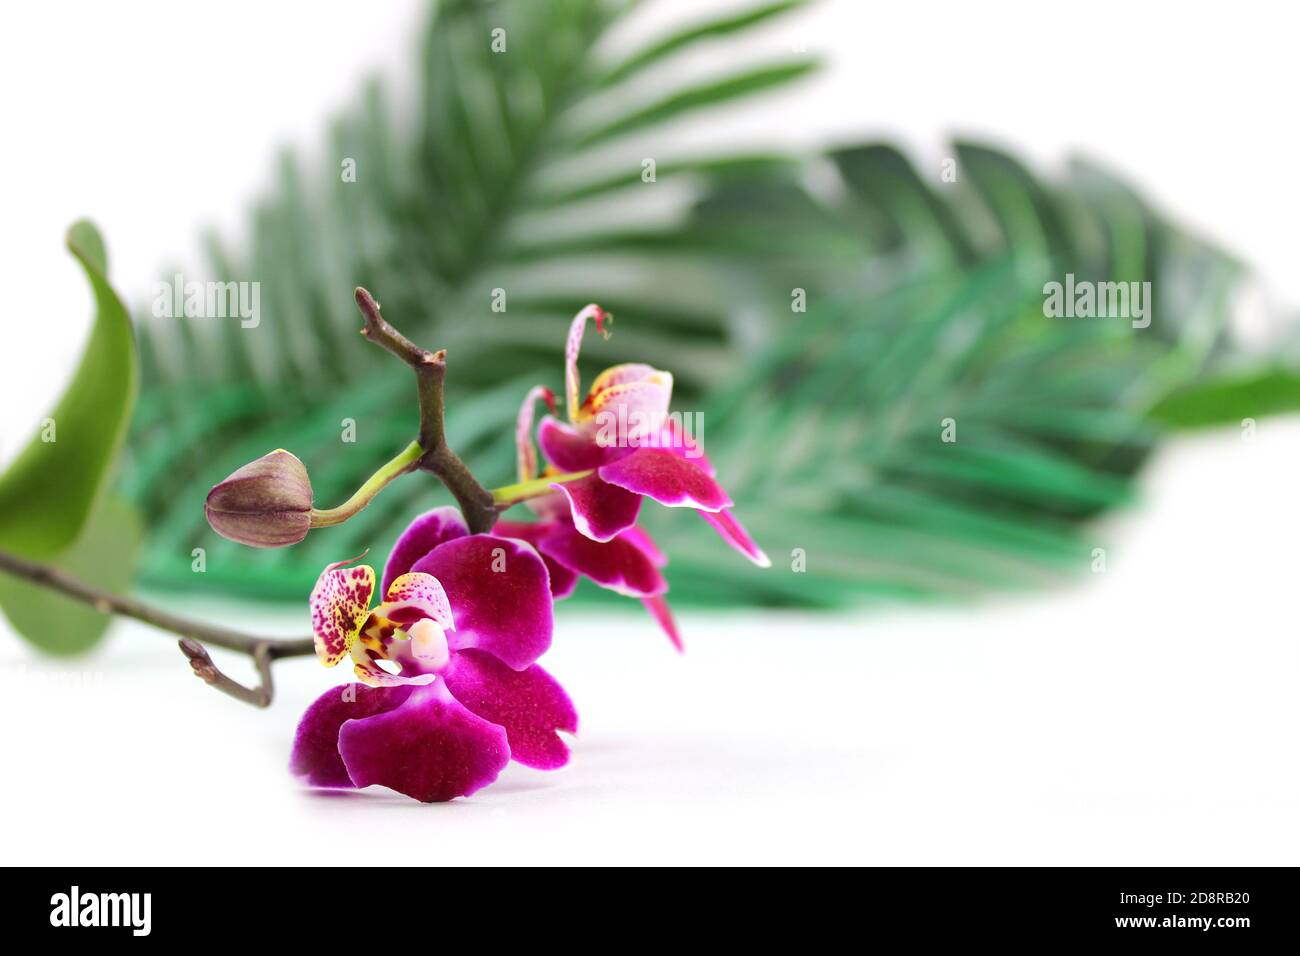 Purple orchid flower phalaenopsis, phalaenopsis or falah on a white background. Purple phalaenopsis flowers on the right. known as butterfly orchids. Stock Photo